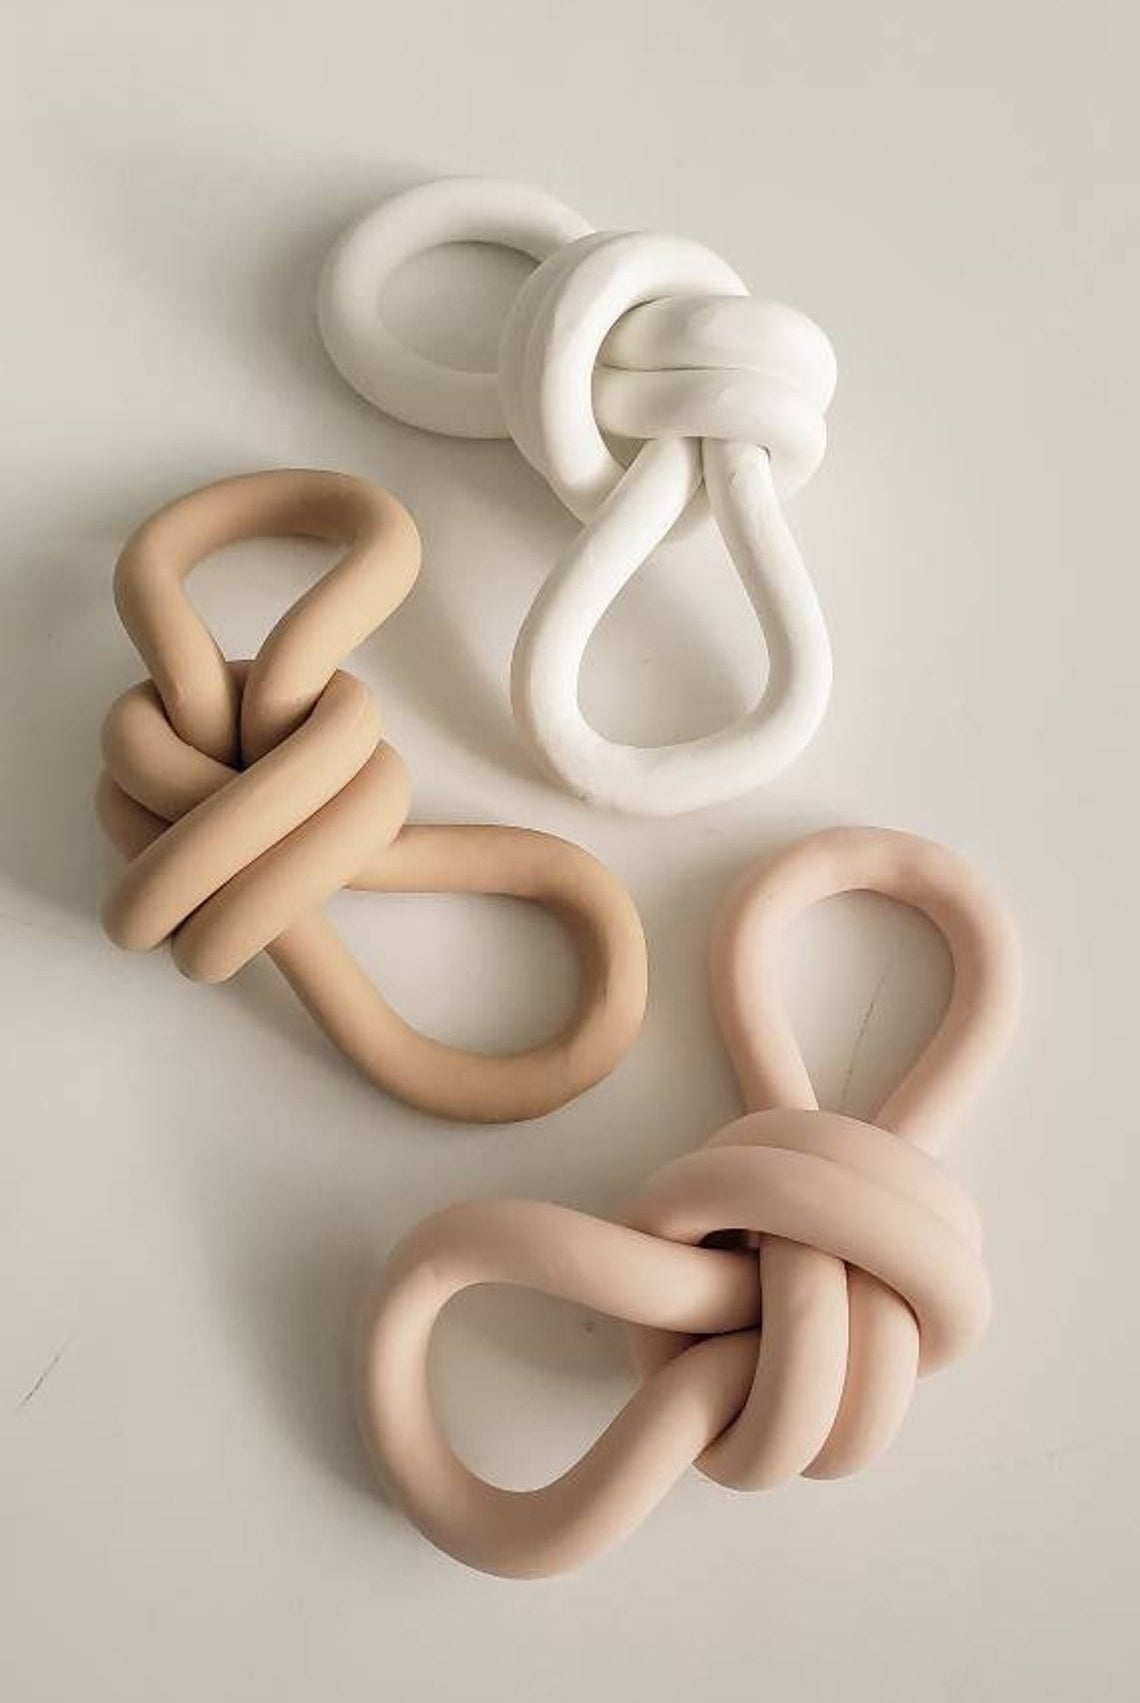 Three knots that look like rope. All are made of different colors of clay. 